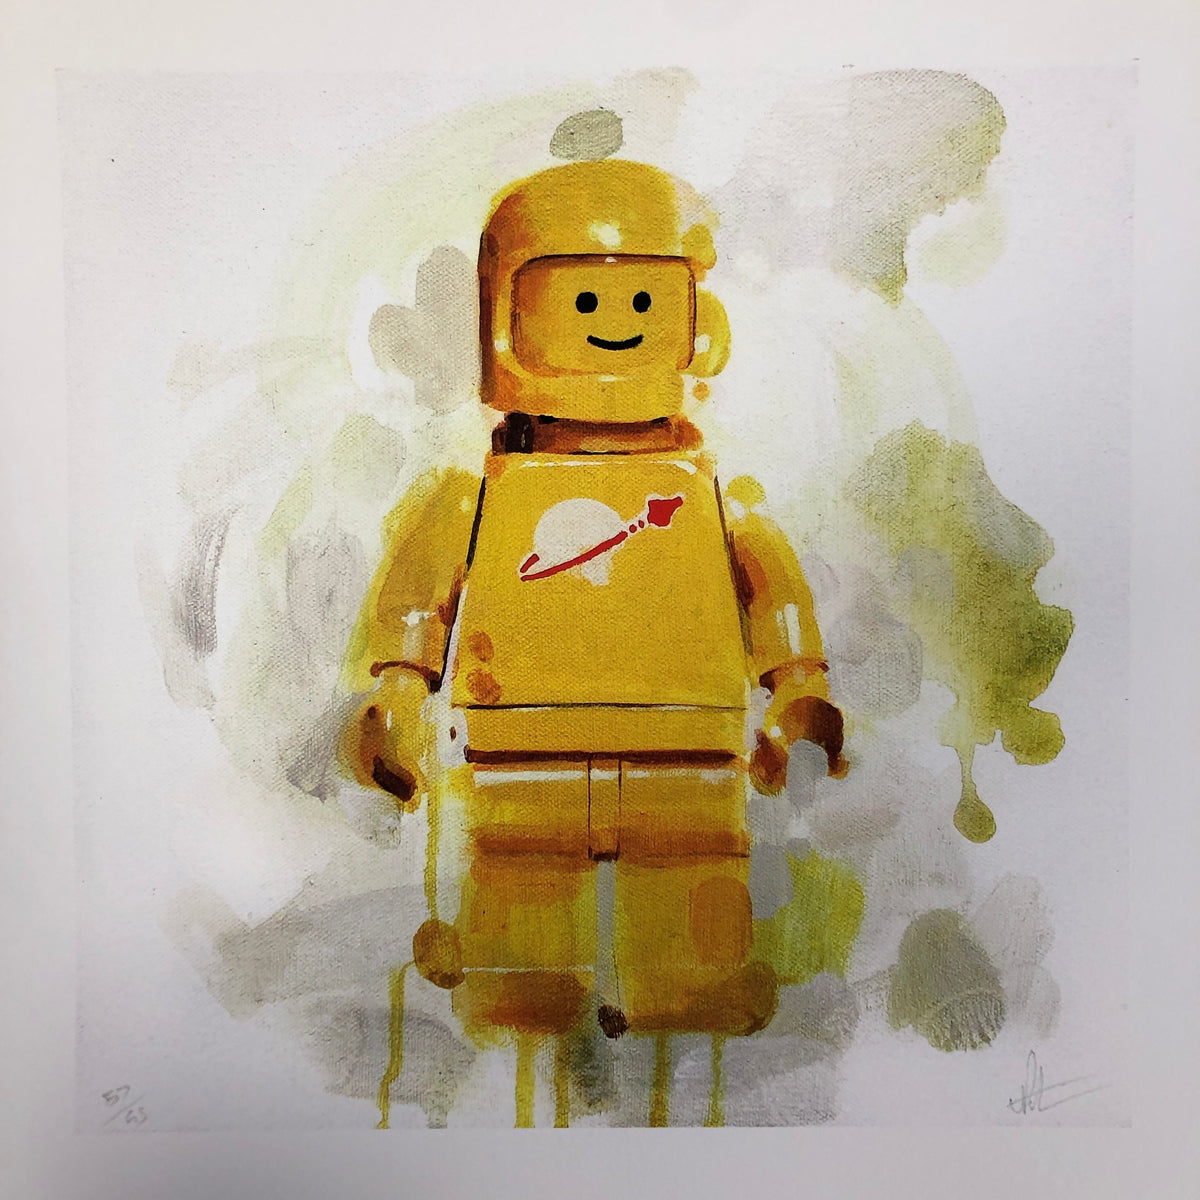 Lego-Yellow by James Paterson